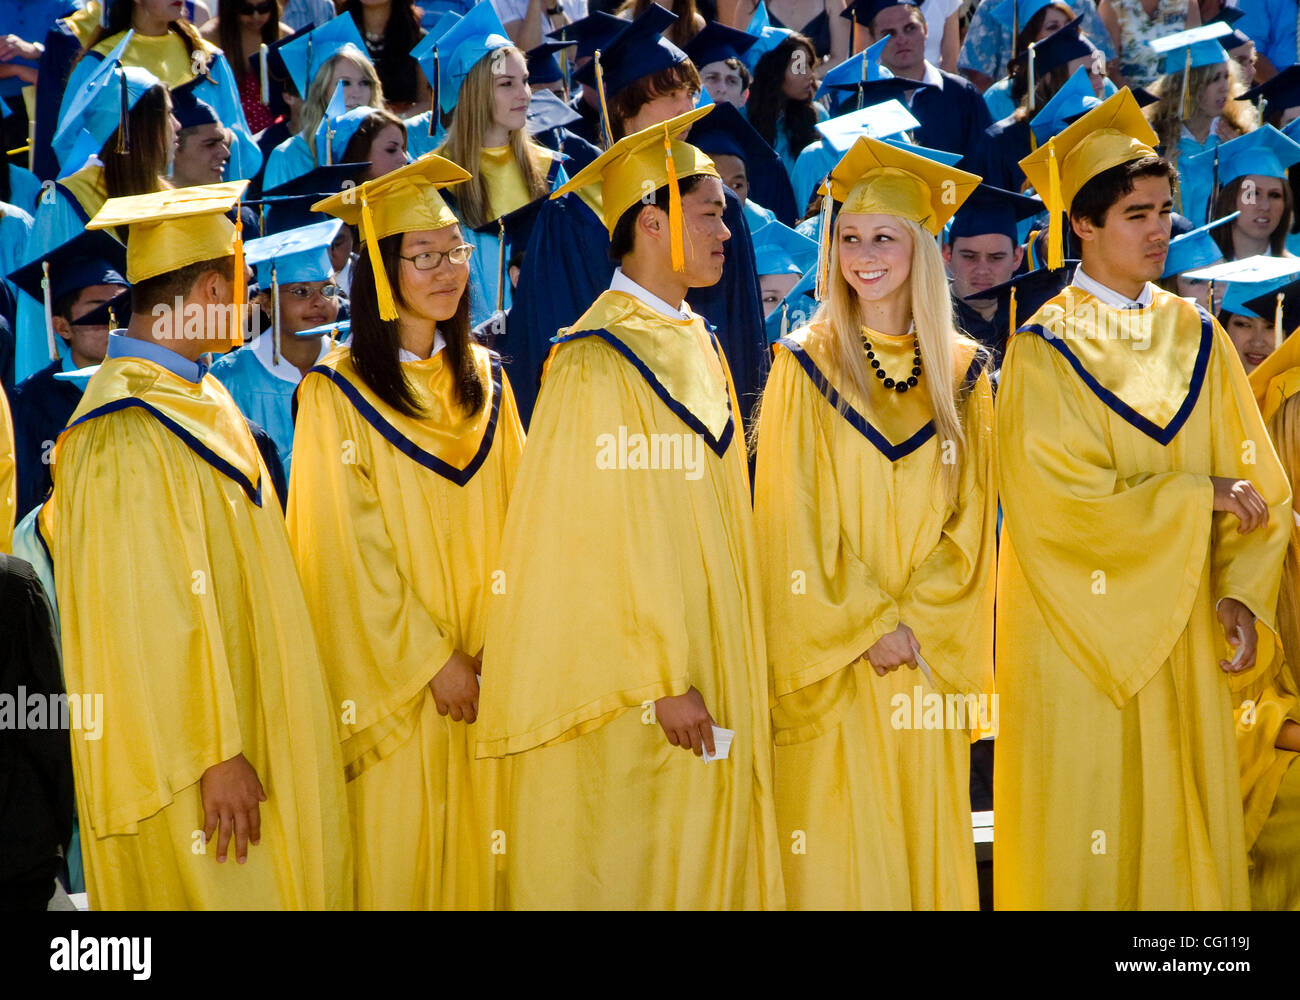 Wearing caps and gowns, high school seniors participate in graduation exercises in Huntington Beach, CA. The yellow gowns denote academic elite students with a 4.0 or higher grade index. Stock Photo